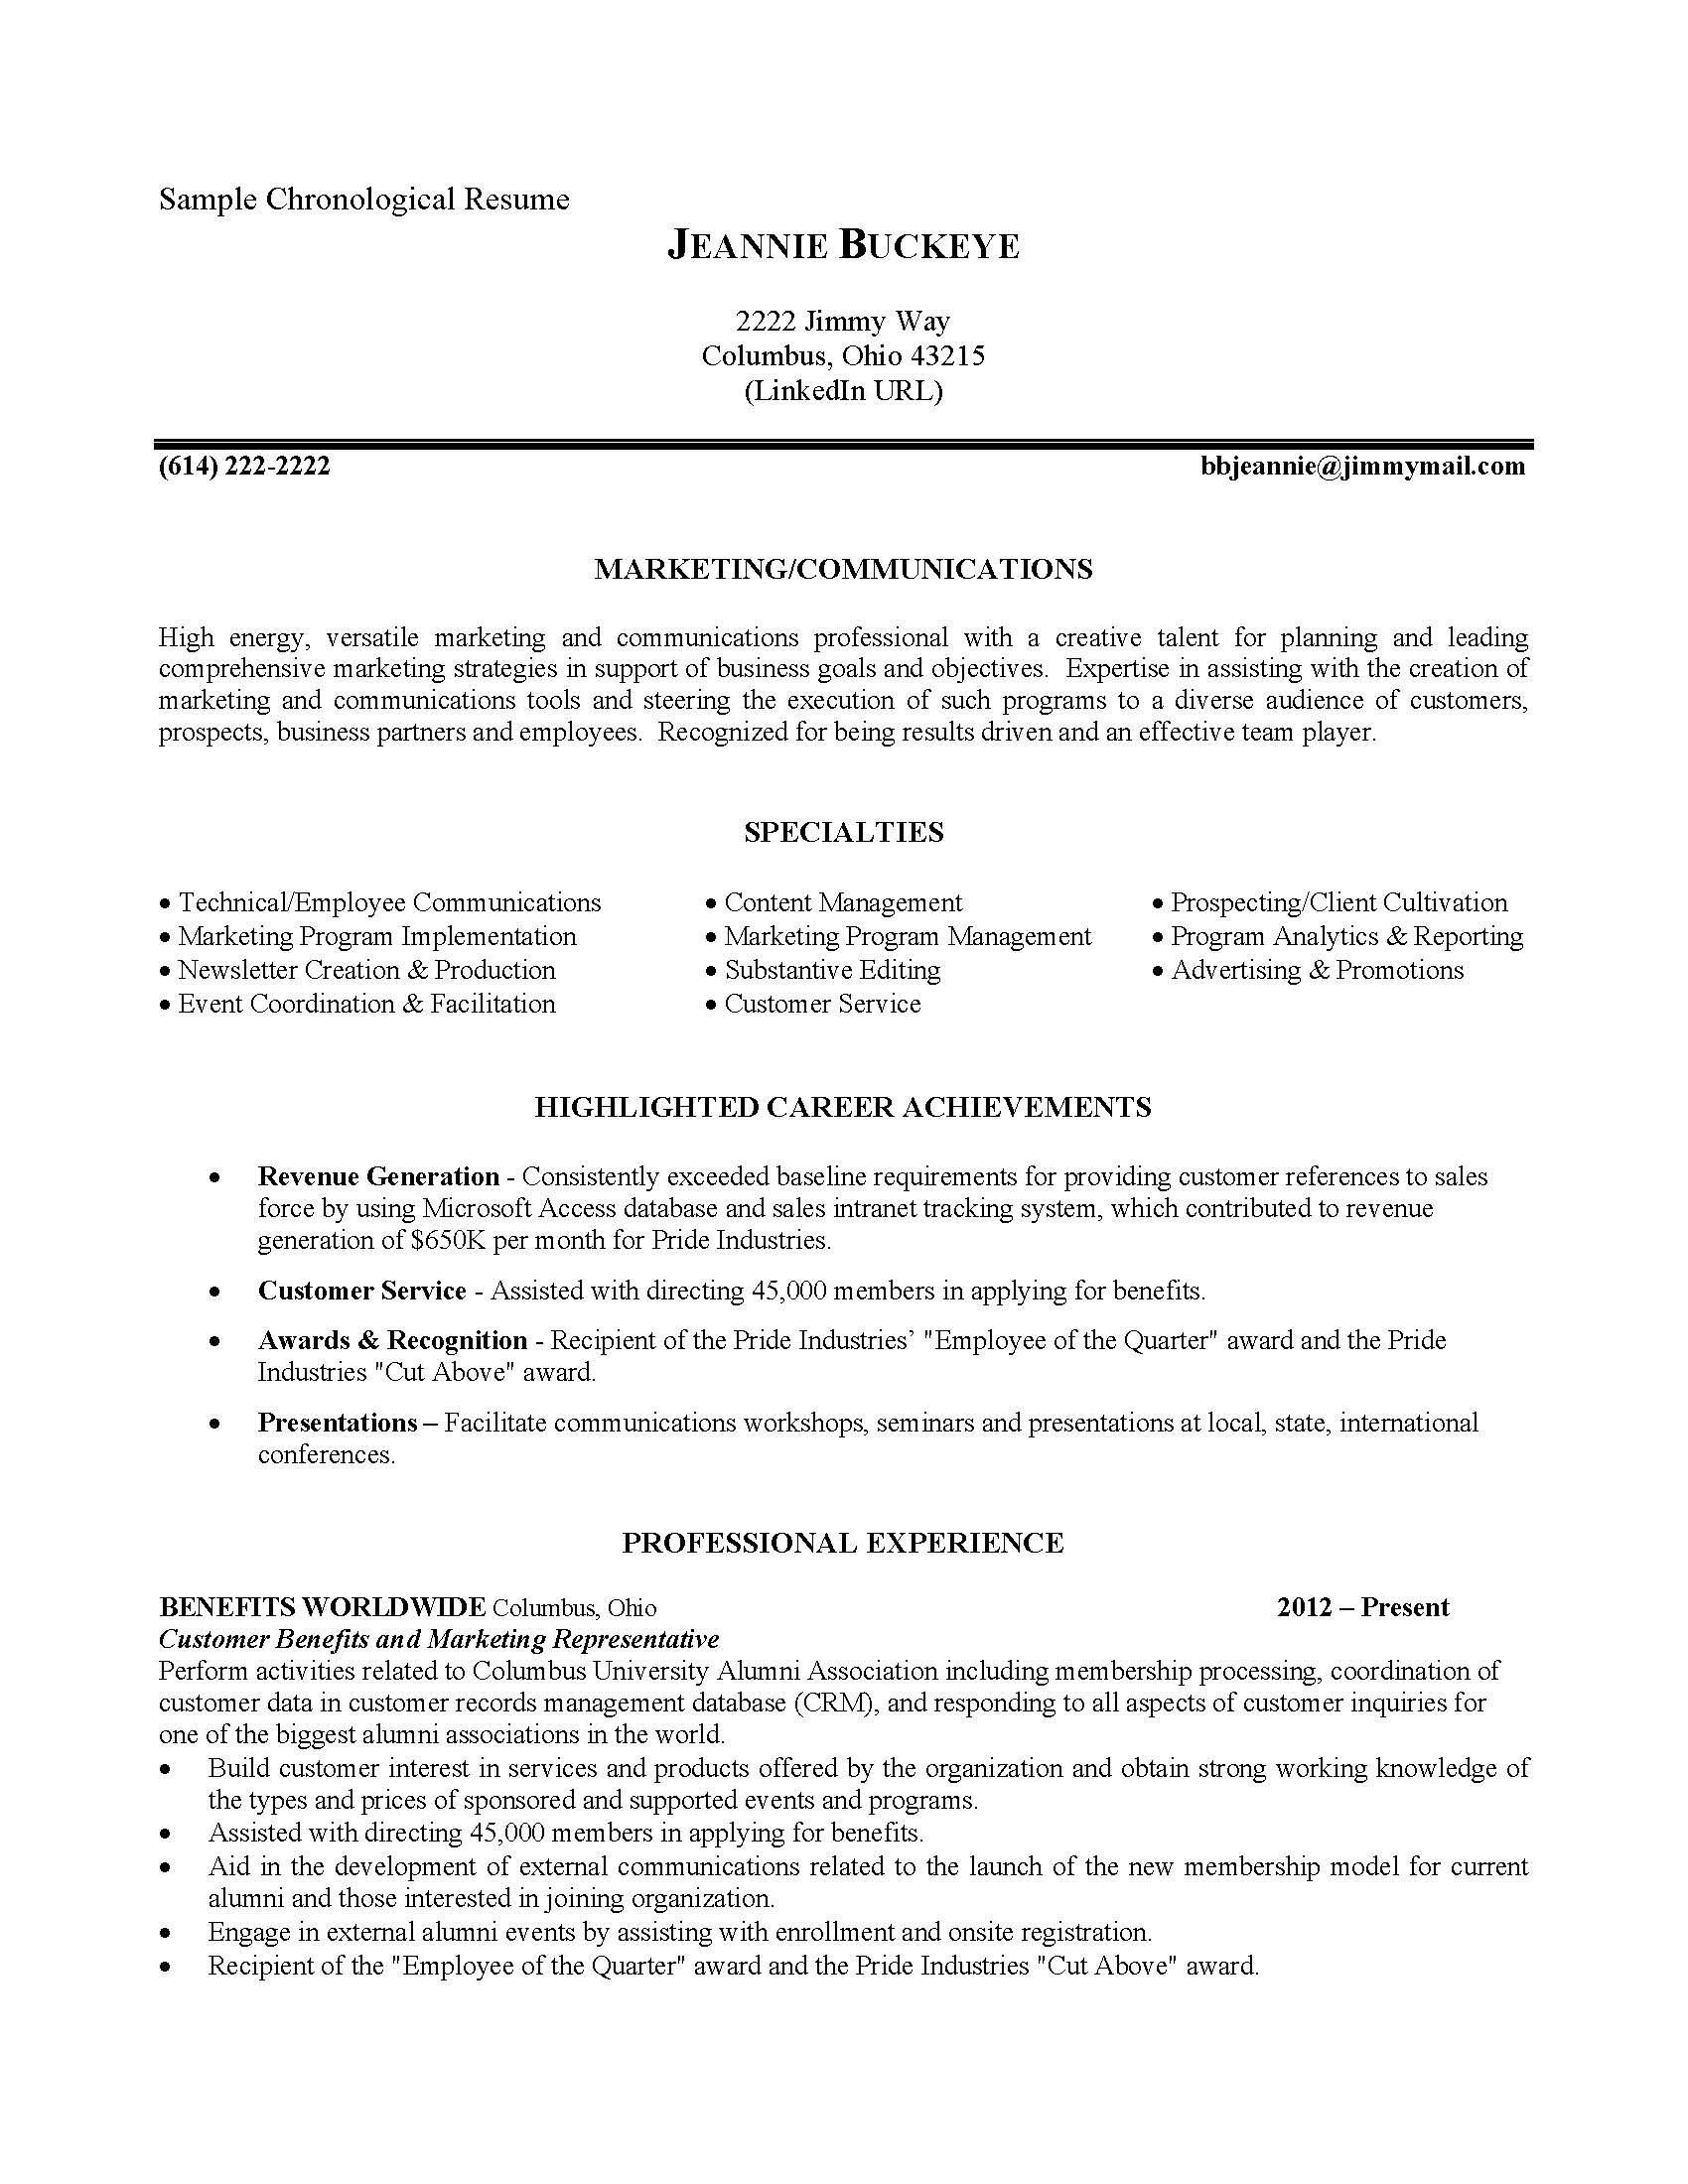 resumes and cover lettersml